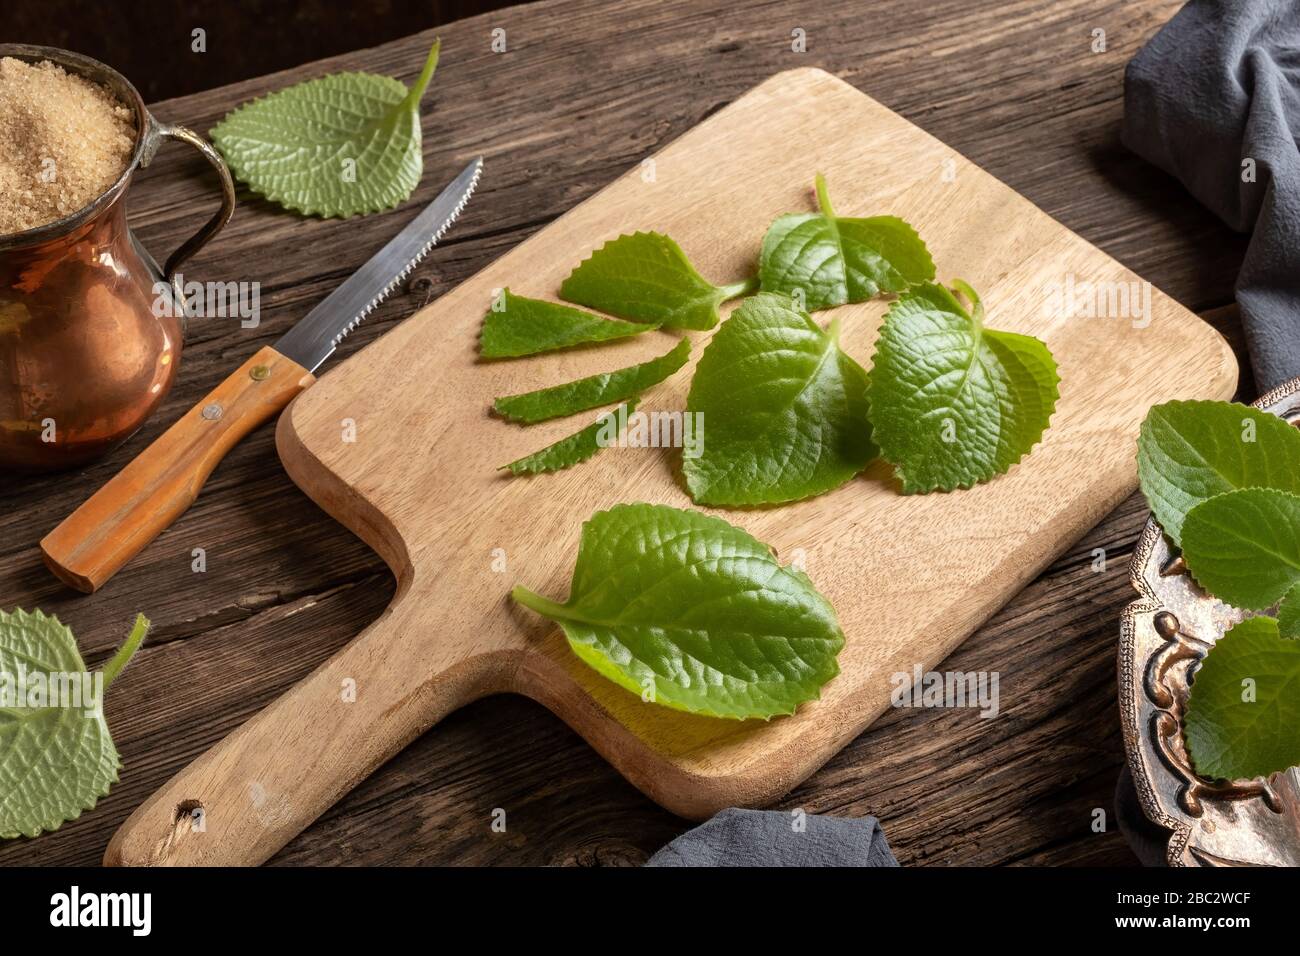 Cutting up silver spurflower leaves to prepare a homemade herbal syrup against common cold Stock Photo